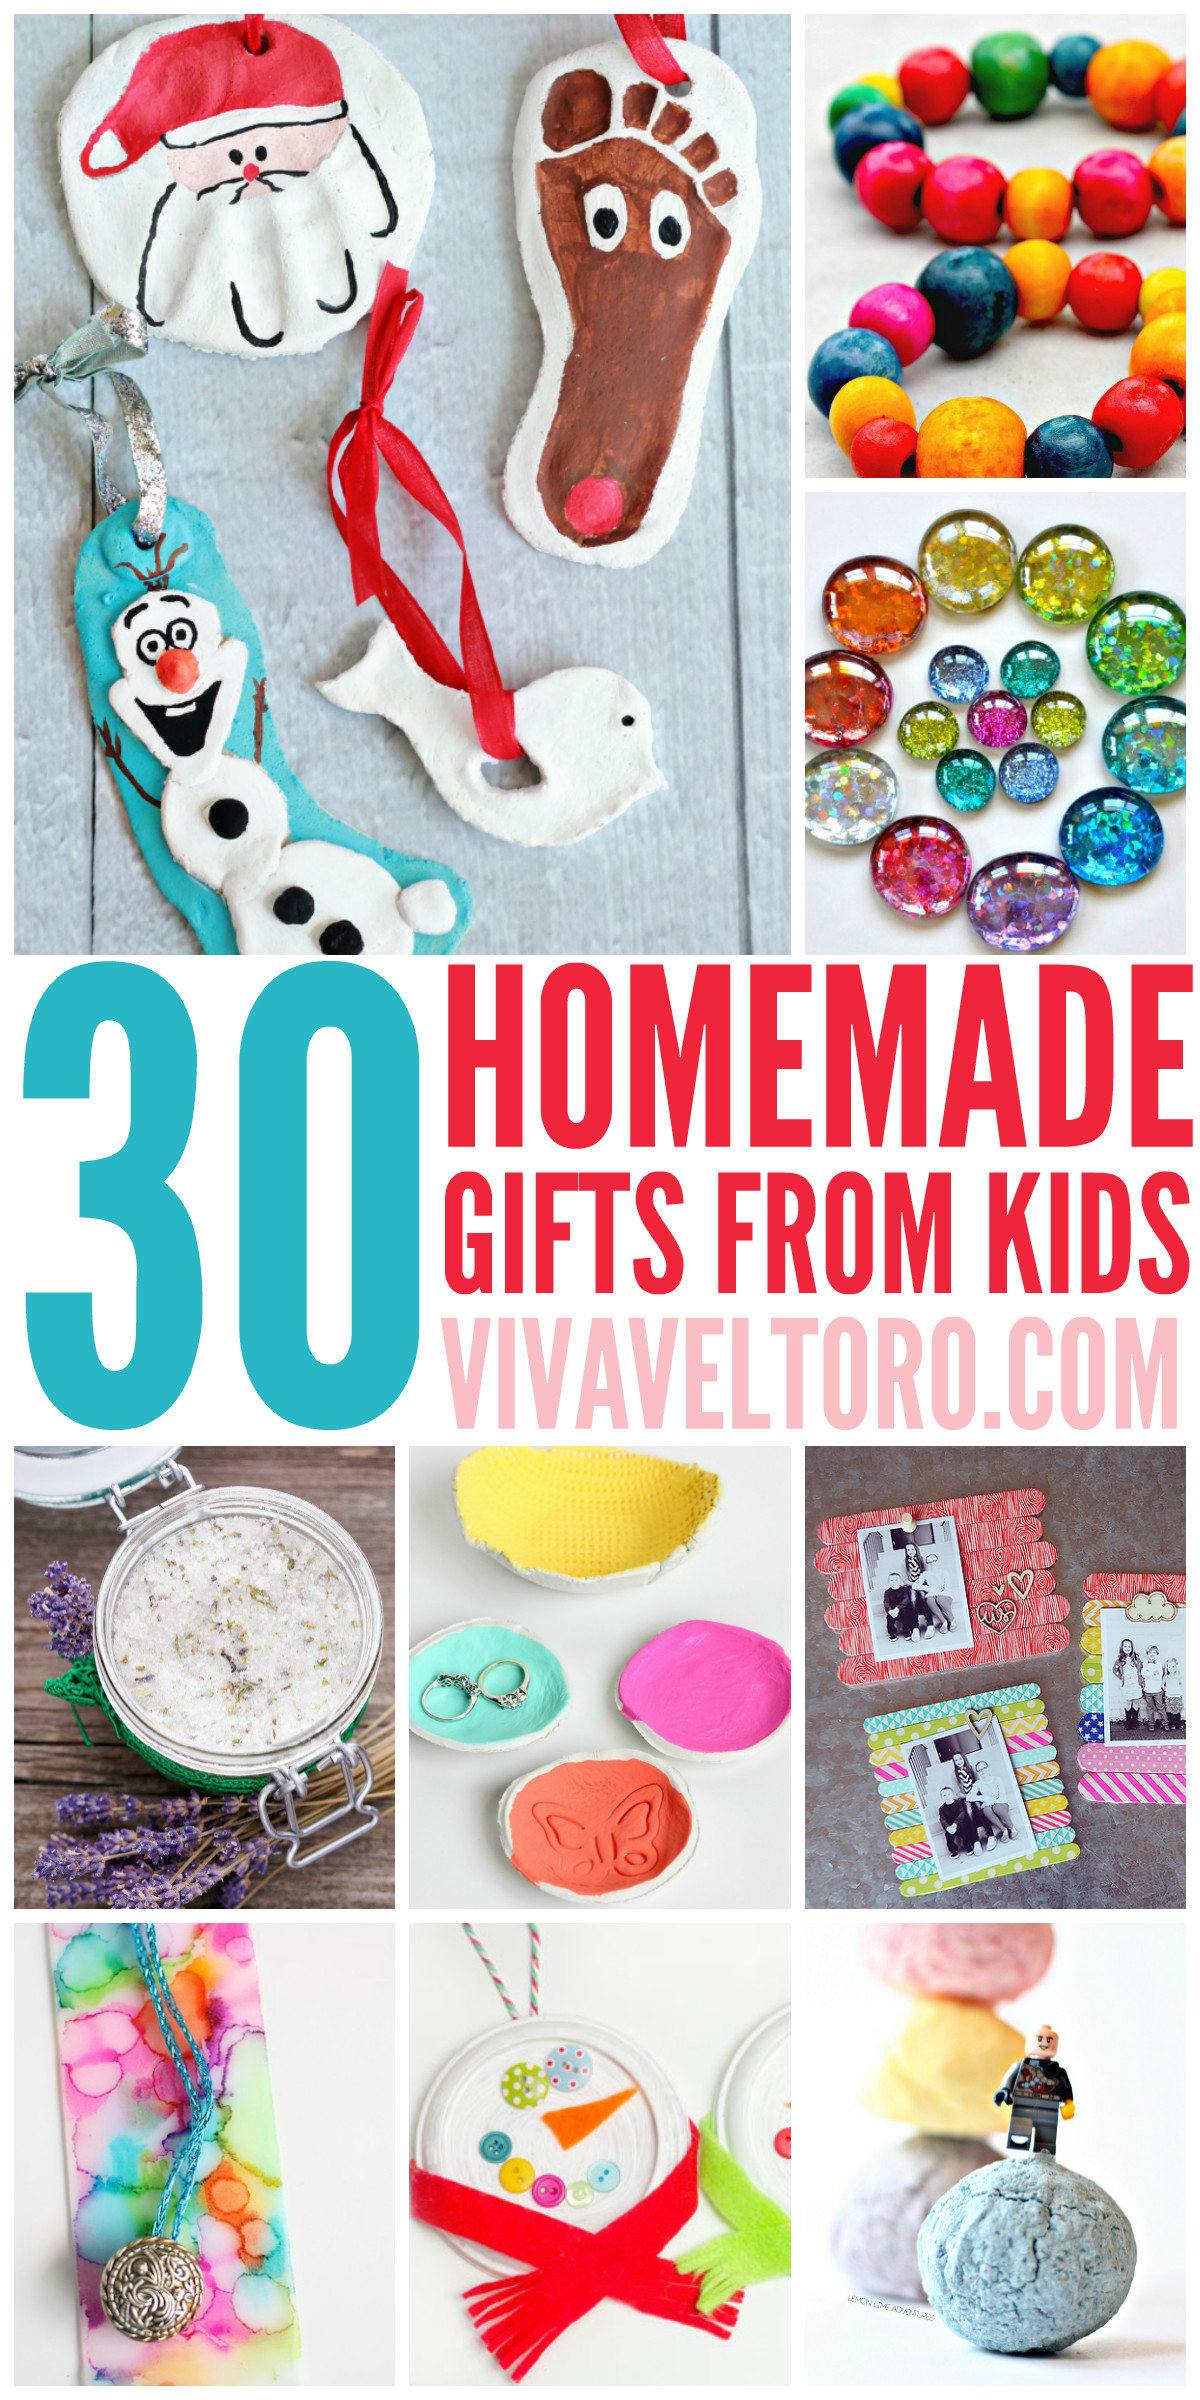 Homemade Gifts From Toddlers
 This list of full of crafts and DIY homemade t ideas